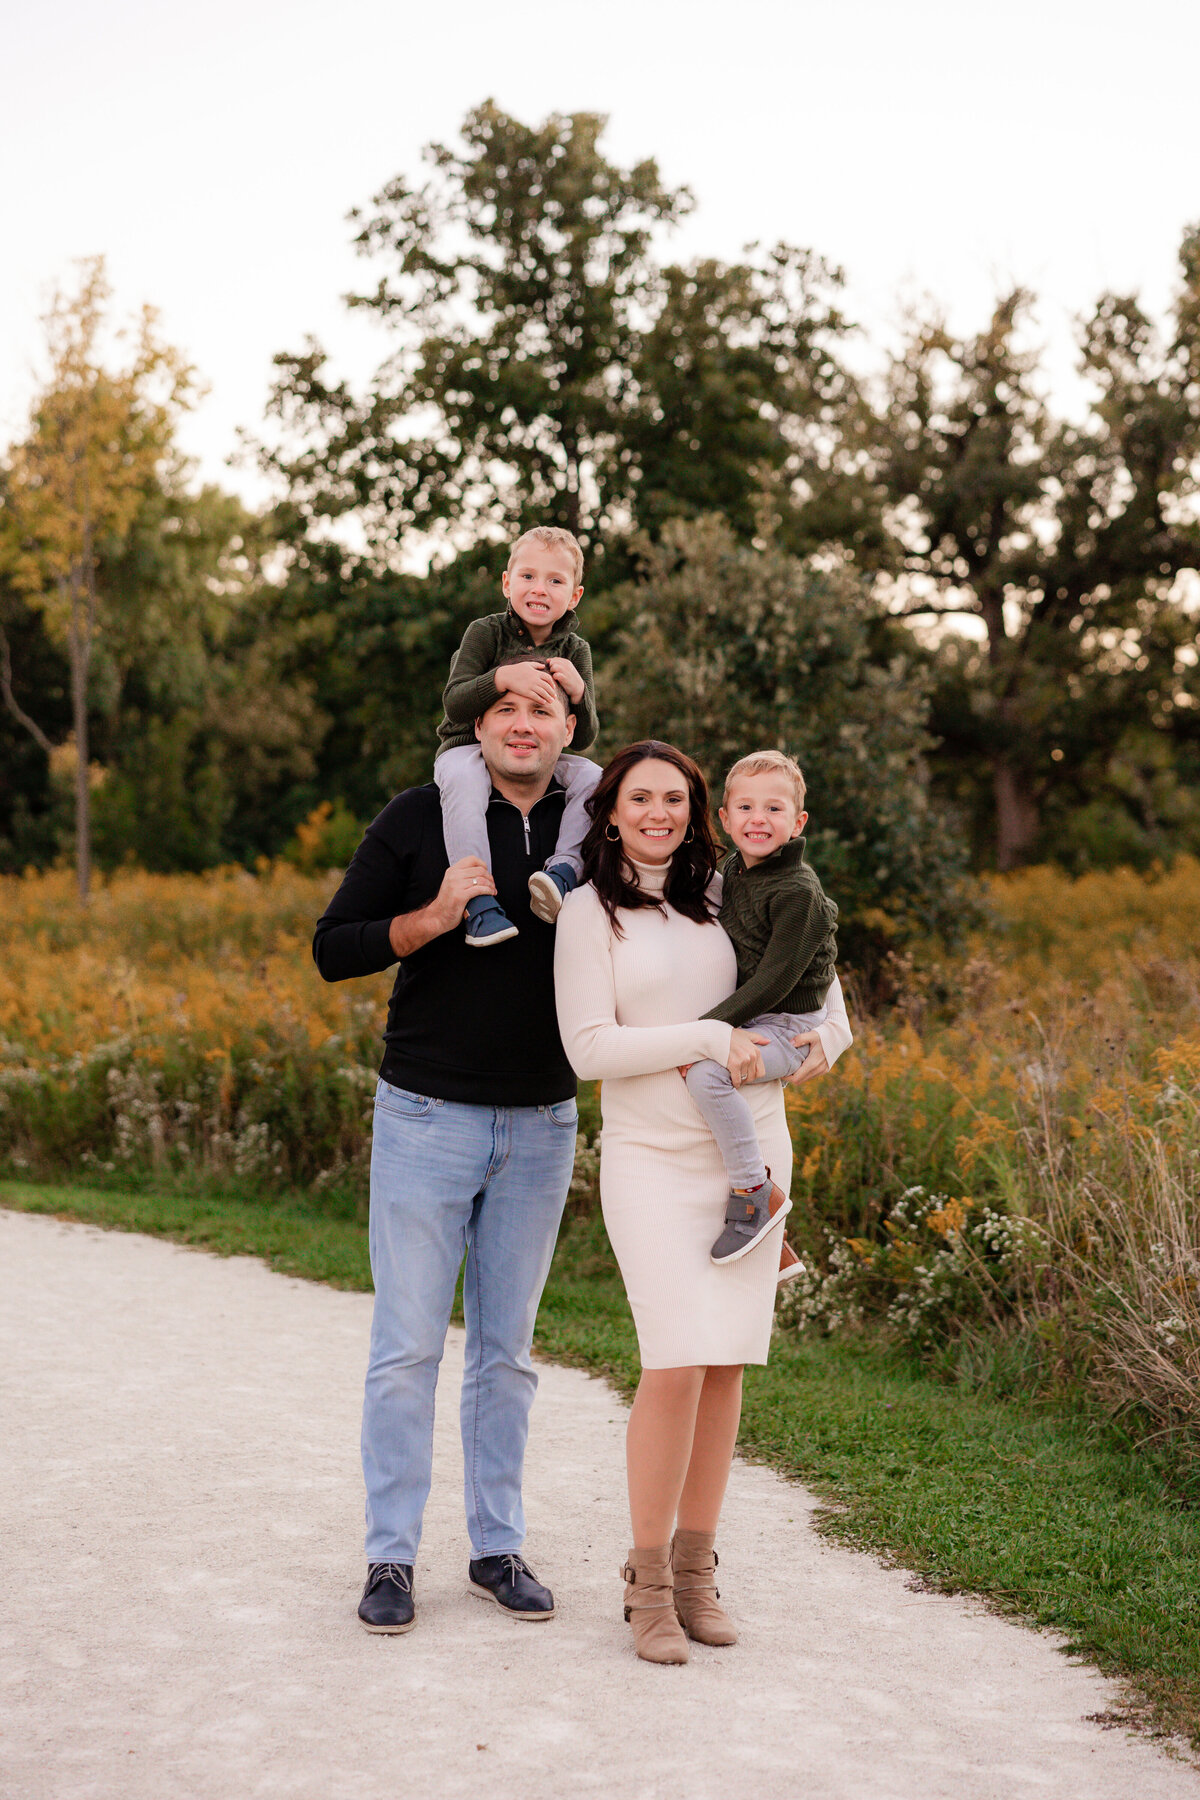 Dad puts one son on his shoulders and moms hold the other son on her hip for a family portrait